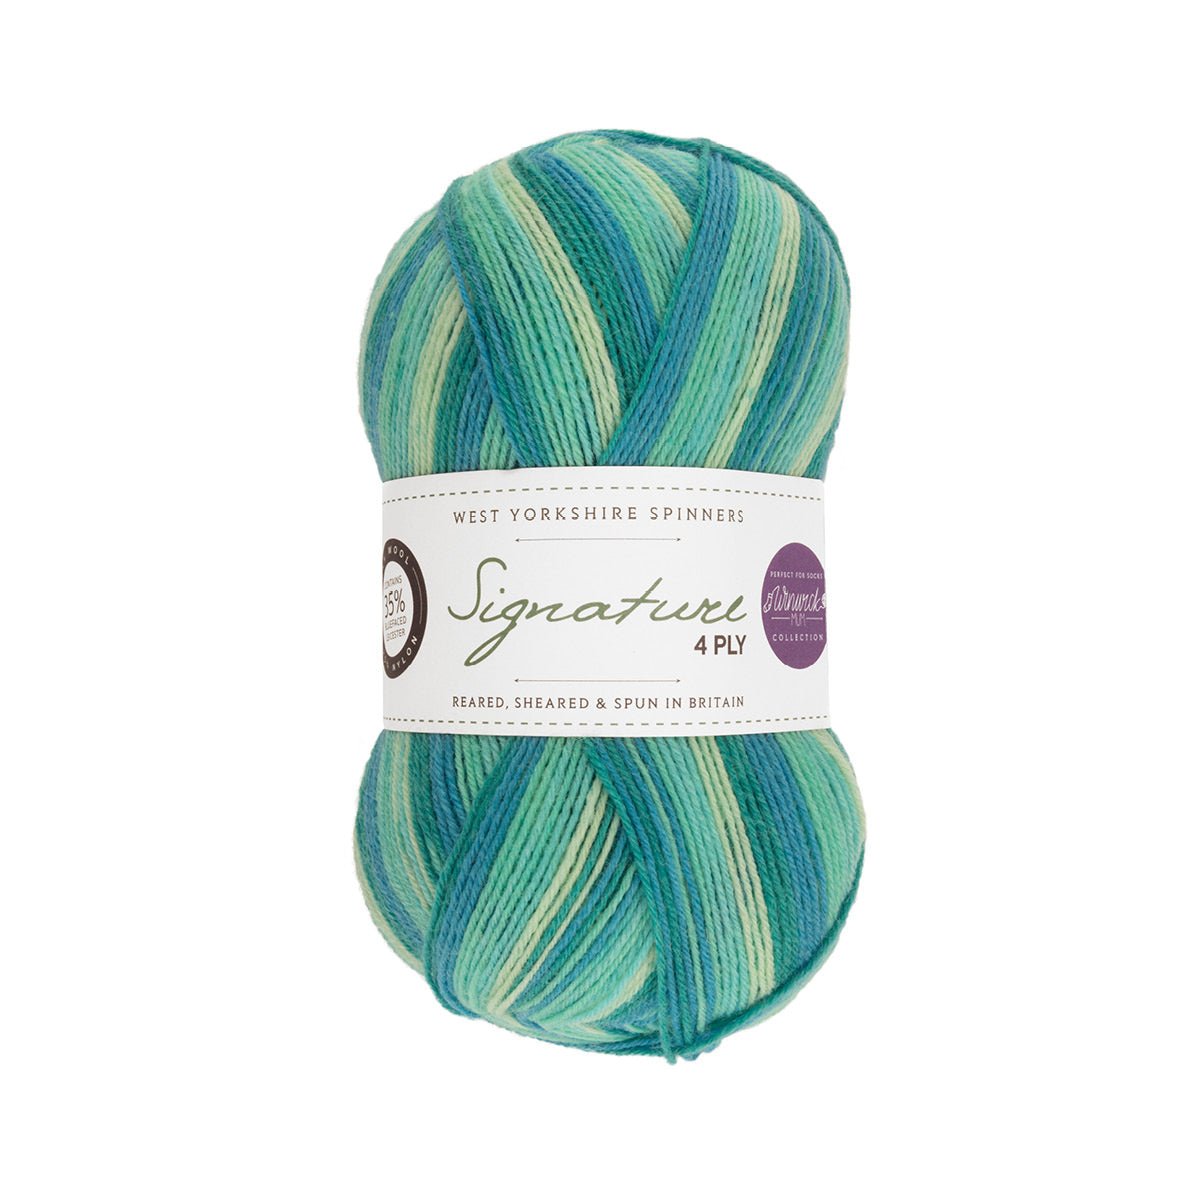 SIGNATURE 4PLY – WINWICK MUM COLLECTION 873-Seascape - West Yorkshire Spinners